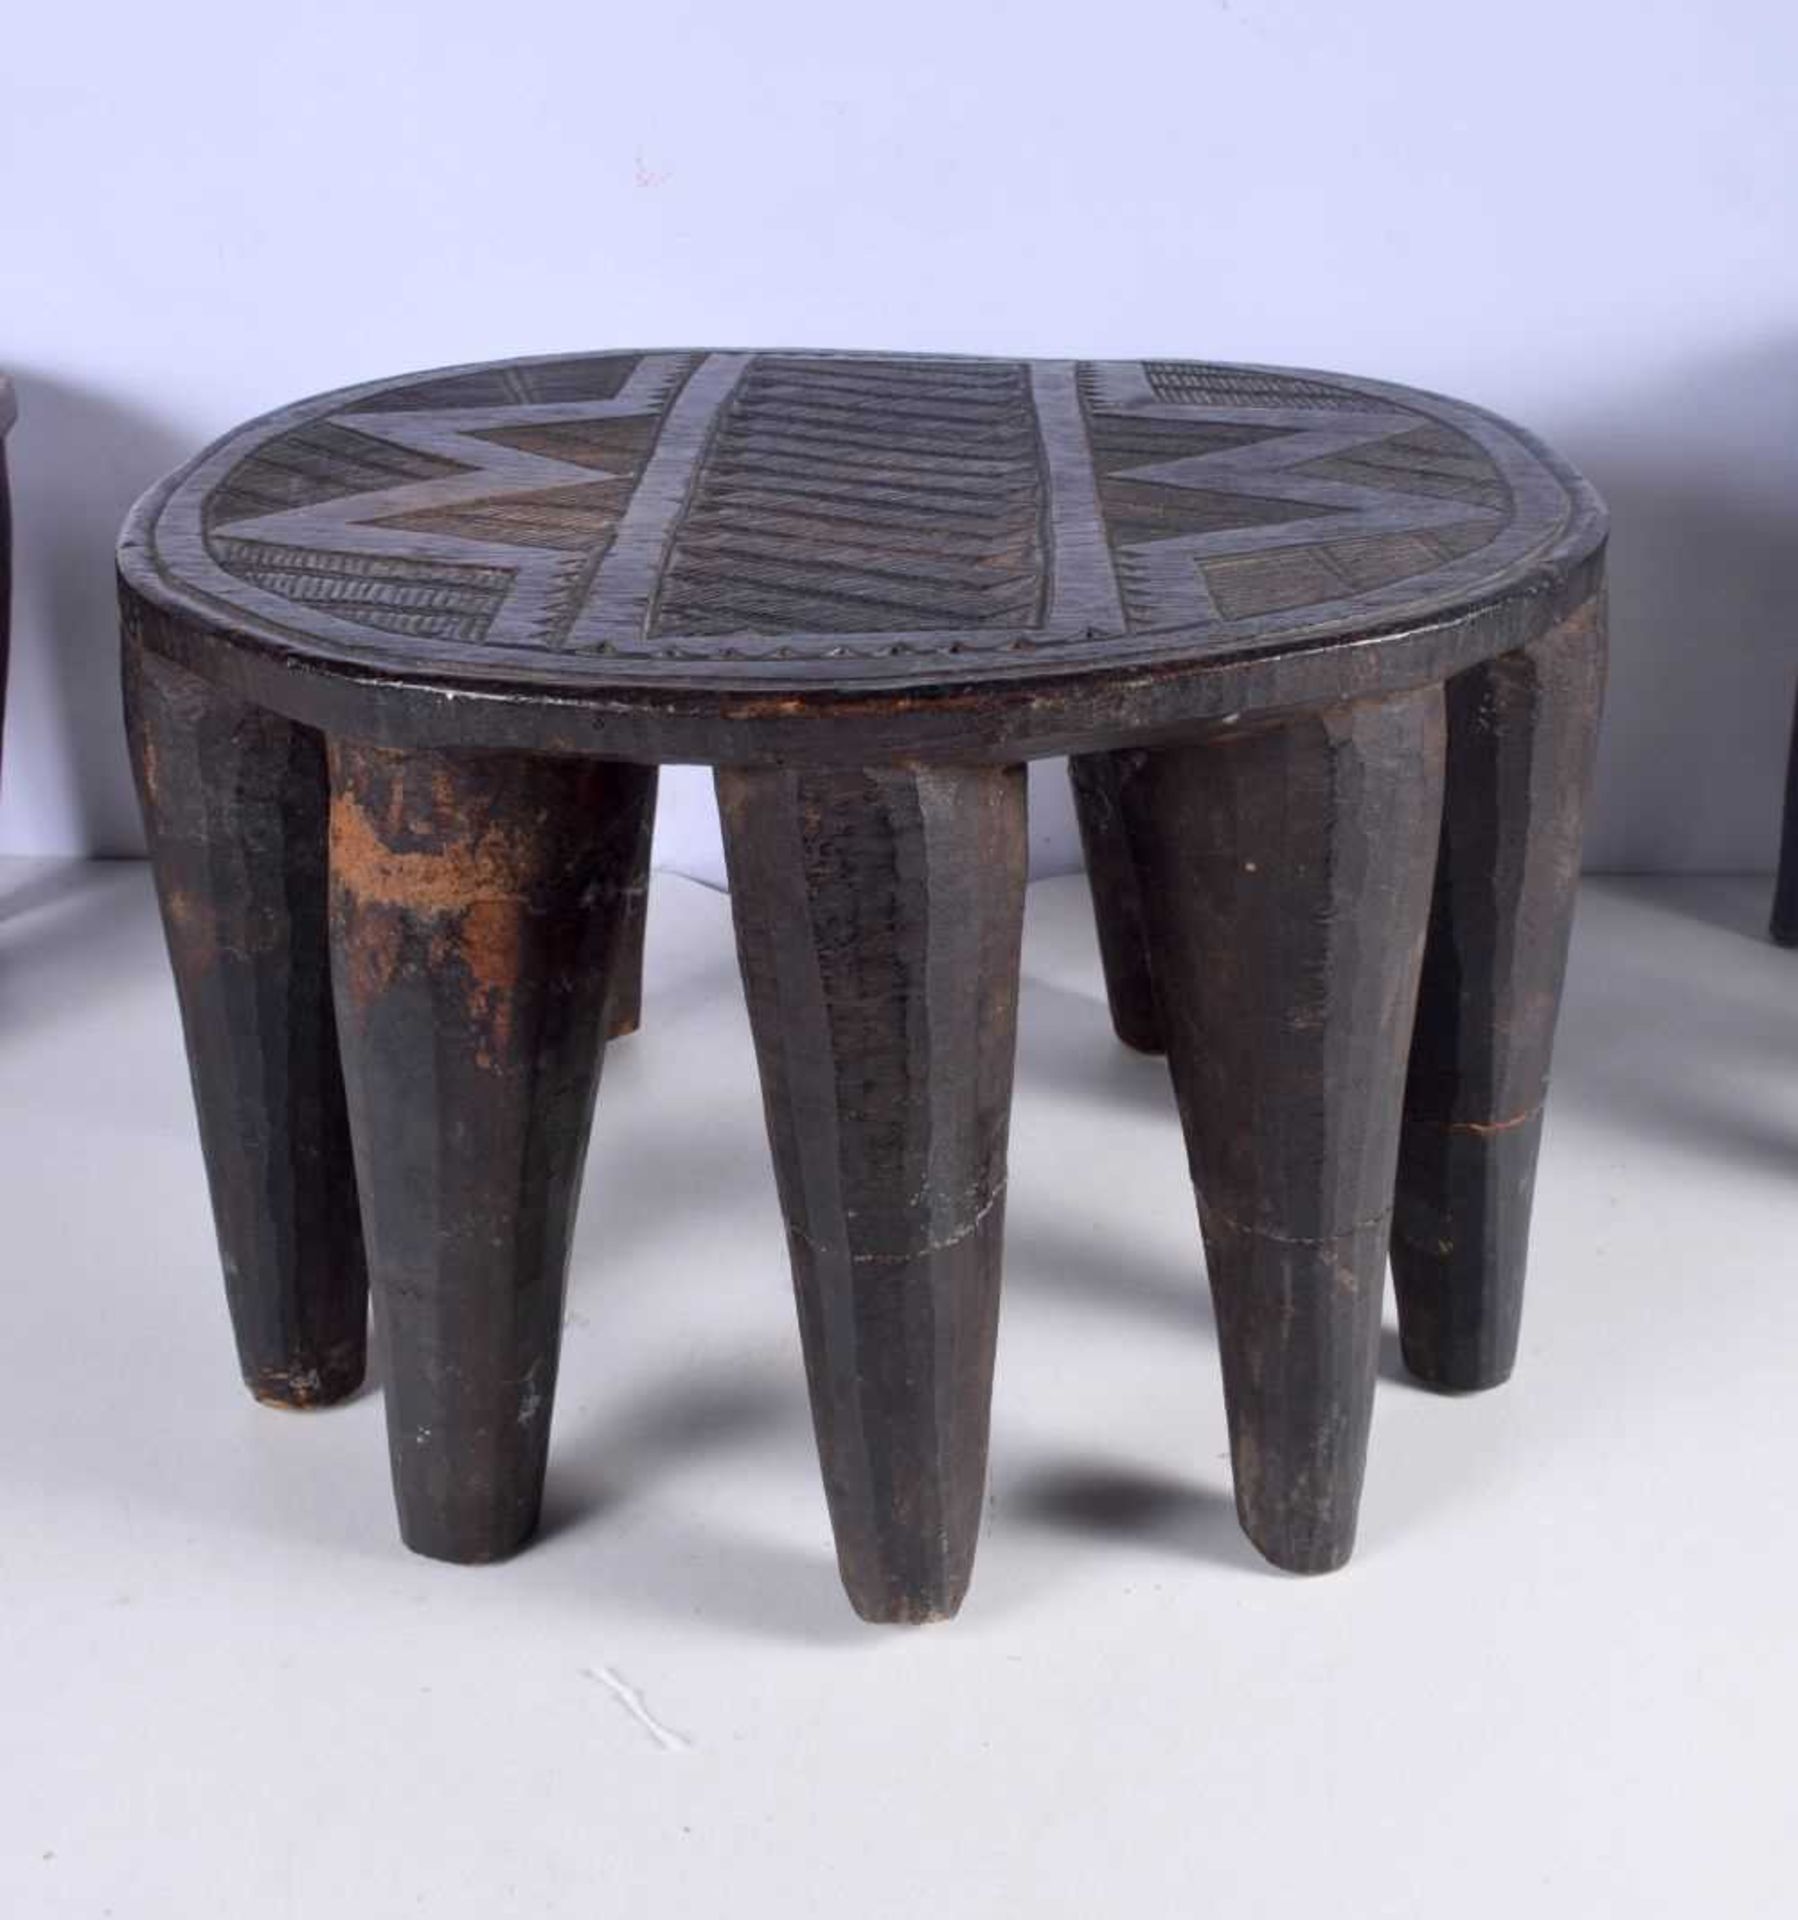 Three early African Nupe Culture carved wood Tribal stools largest 26 x 42 cm (3). - Image 2 of 4